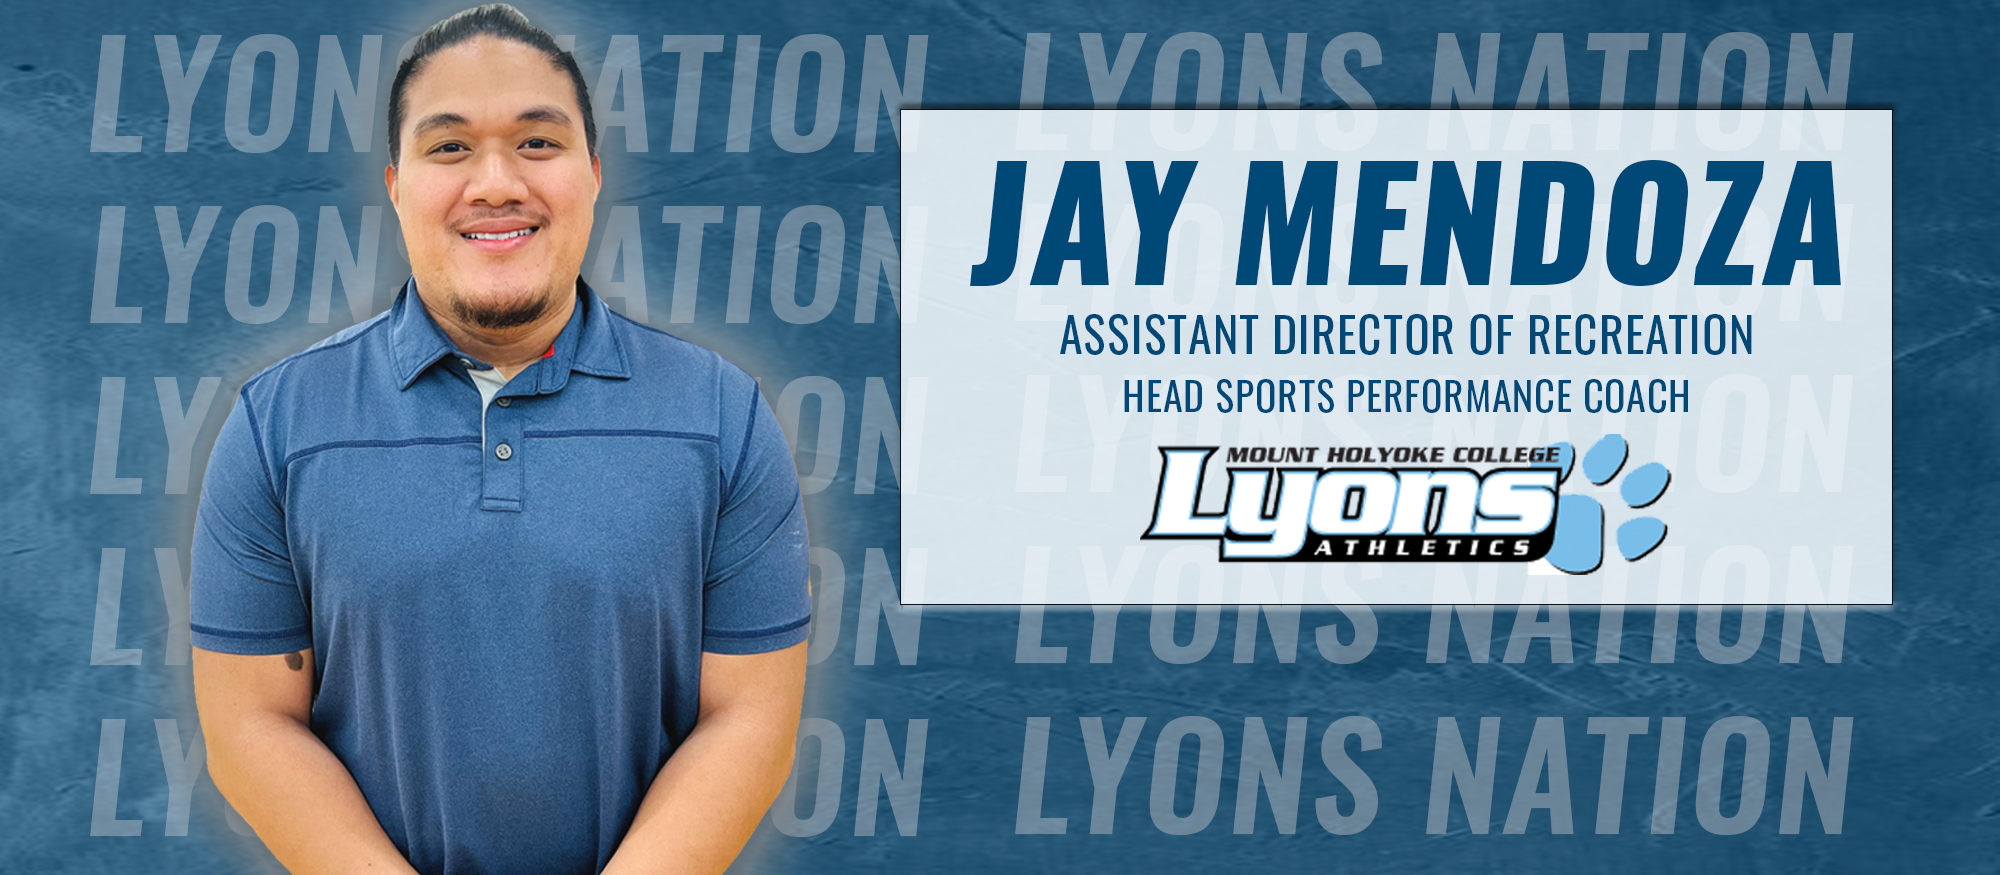 Jay Mendoza Joins Mount Holyoke as Assistant Director of Recreation/Head Sports Performance Coach